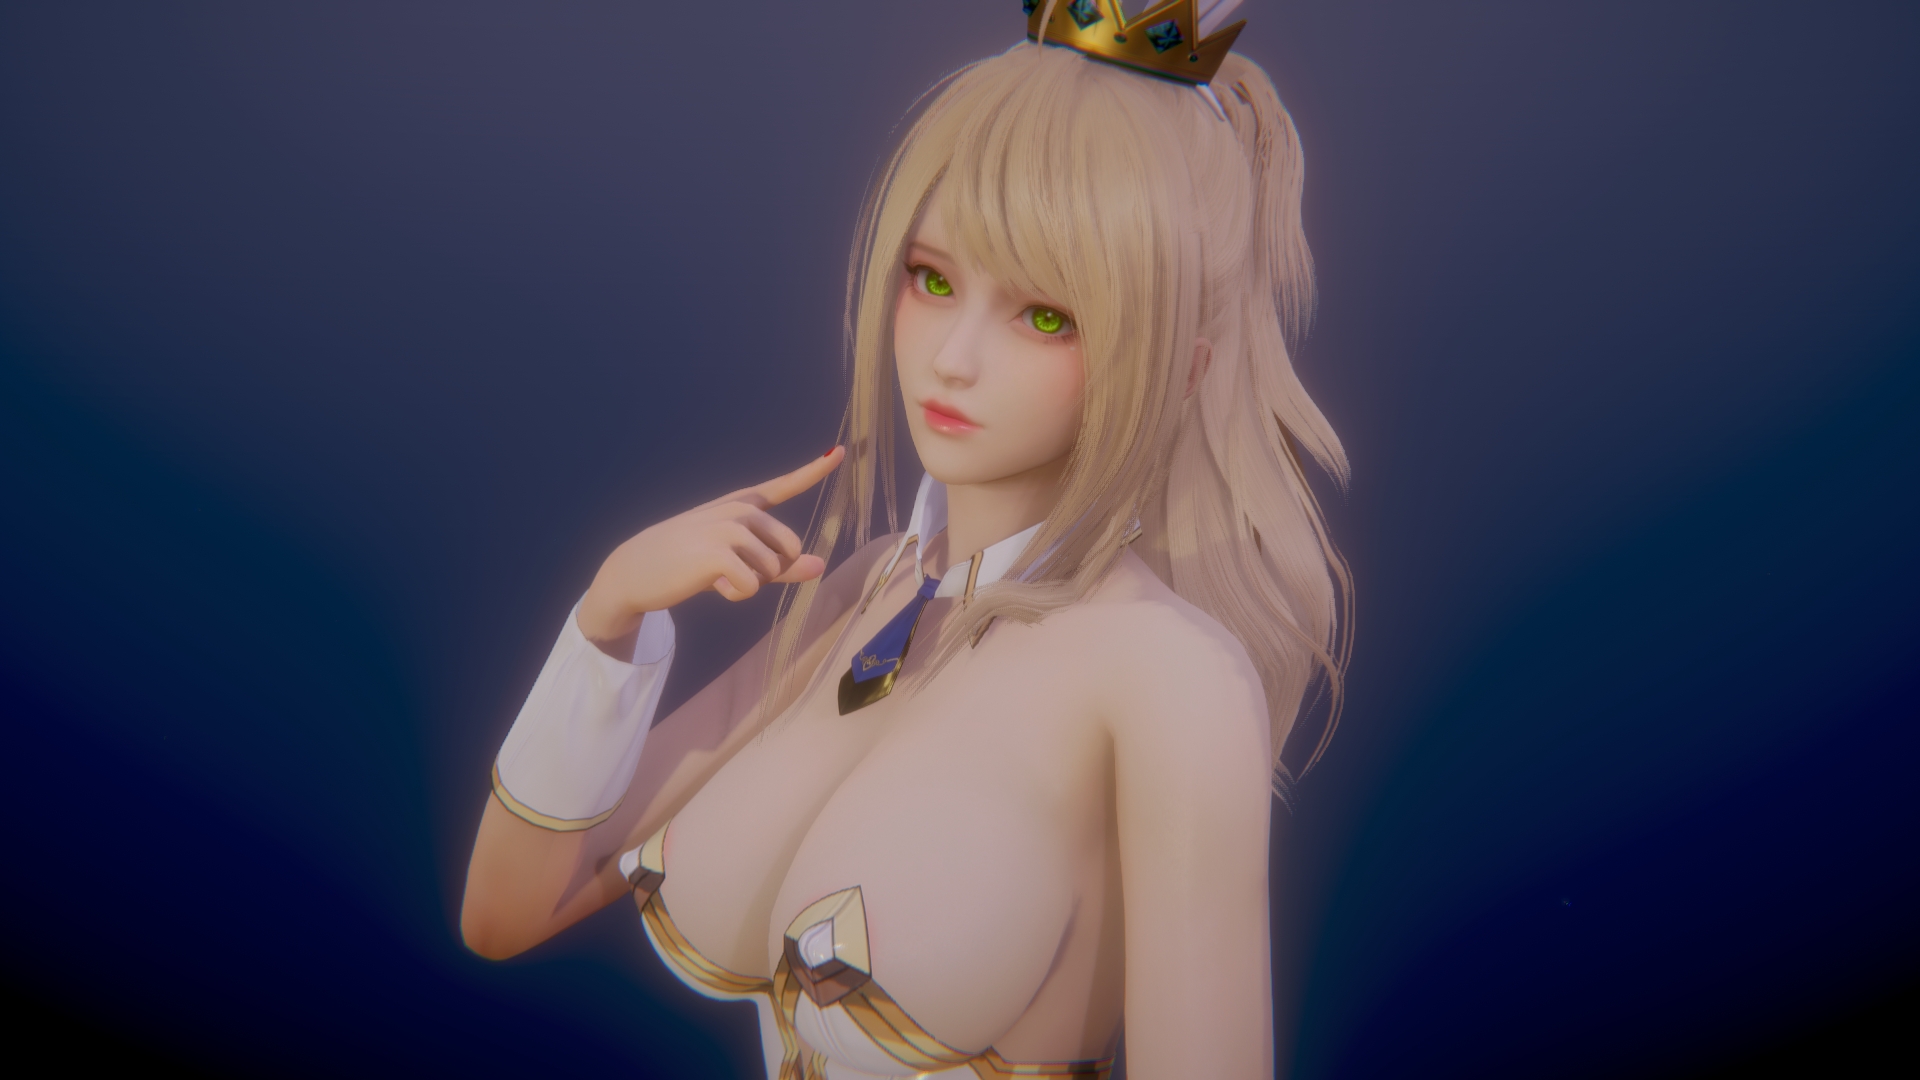 Honey Select 2 Honey Select 2 3d Girl Bunny Sexy Aigirl Big Tits Big Breasts Outfit Long Legs Animal Ears Sfw 4